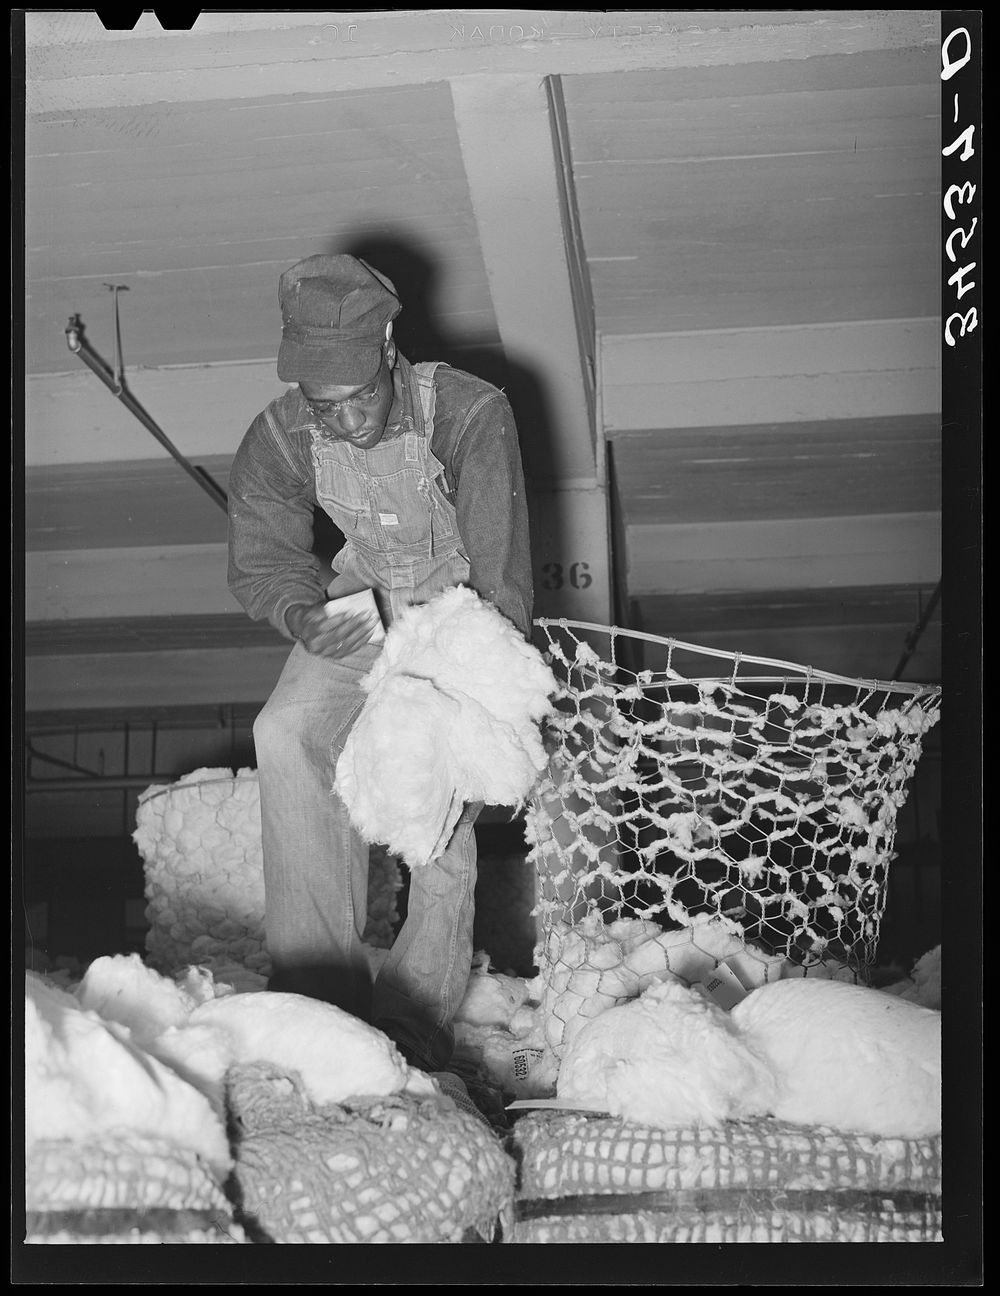 Tagging samples of cotton. Compress, Houston, Texas by Russell Lee